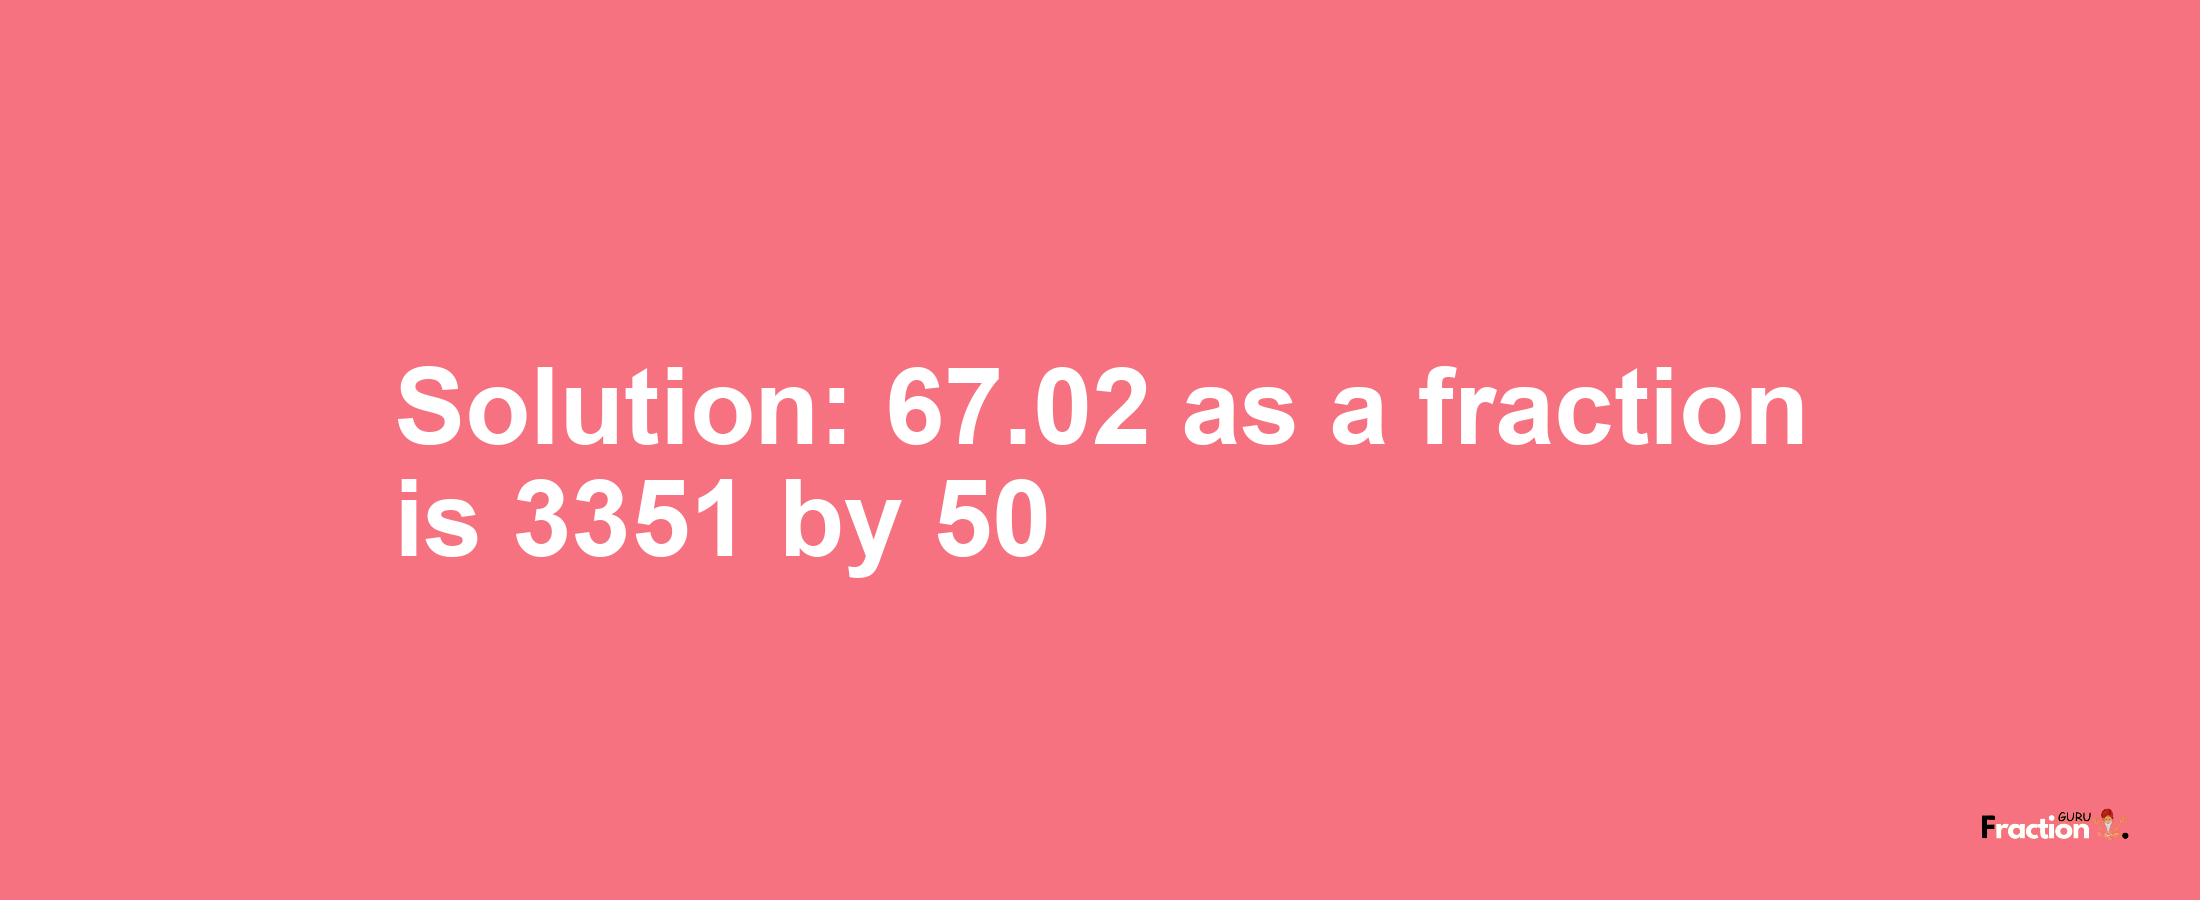 Solution:67.02 as a fraction is 3351/50